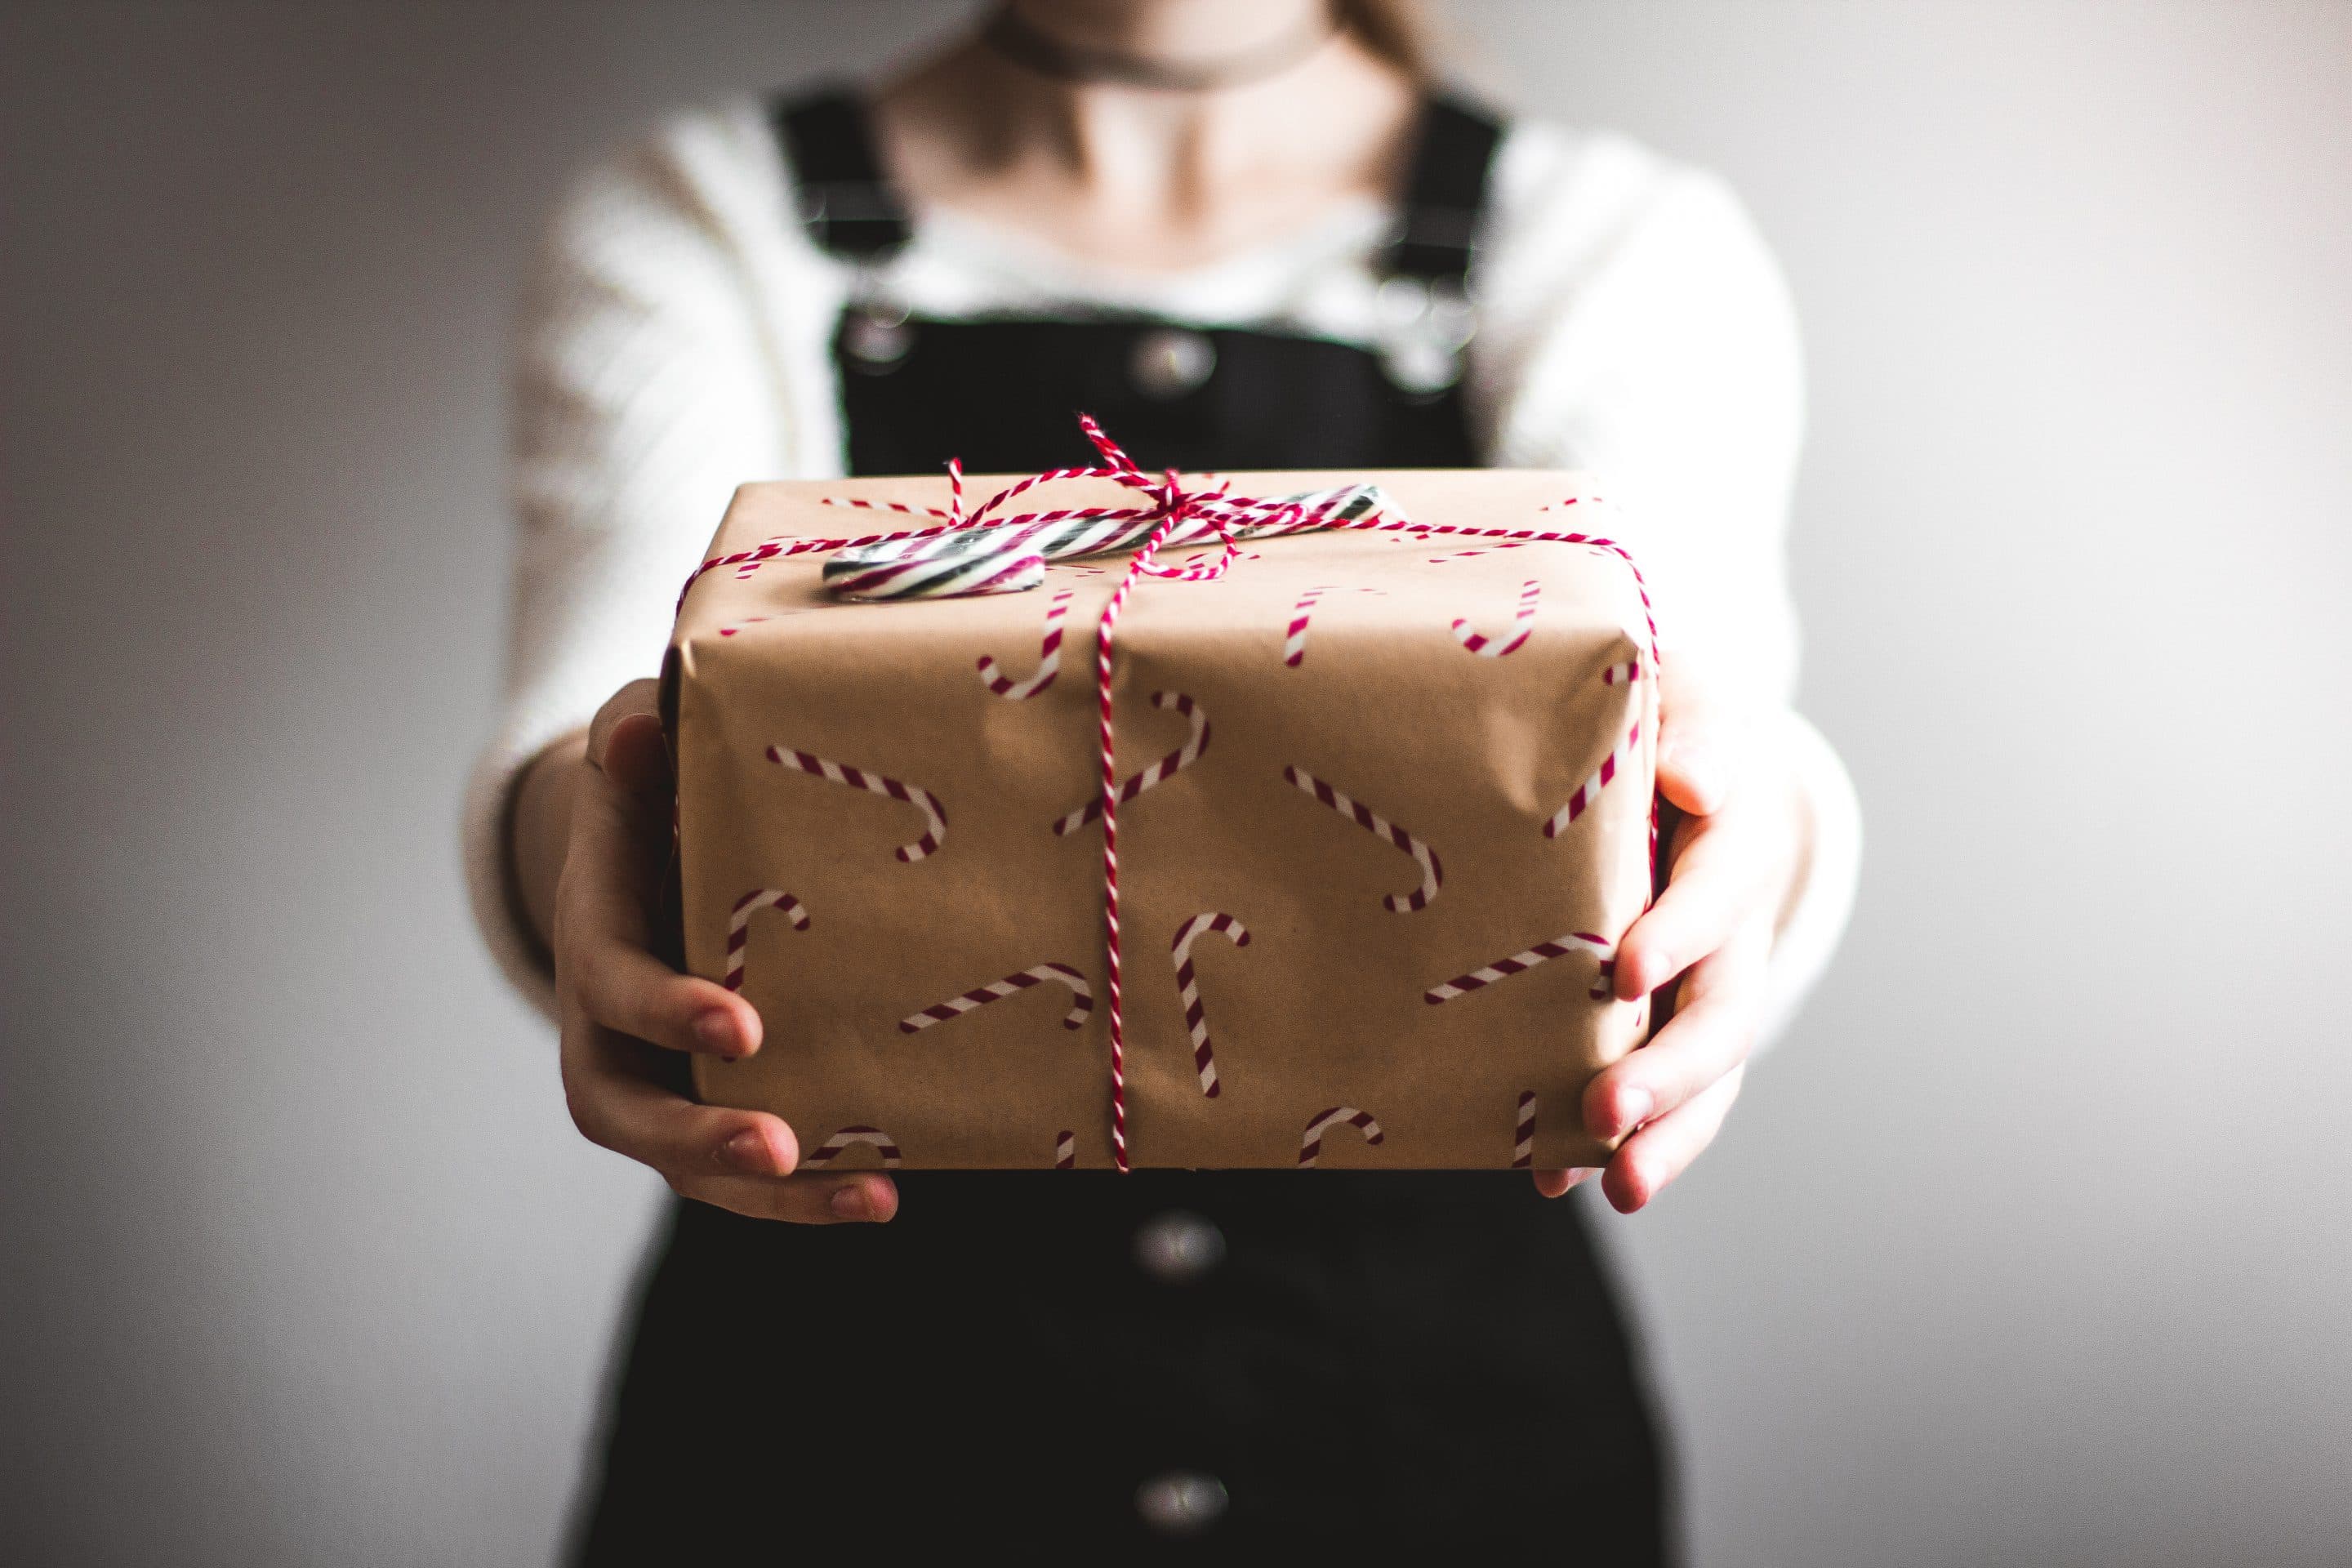 image of person holding out a wrapped gift from unsplash.com